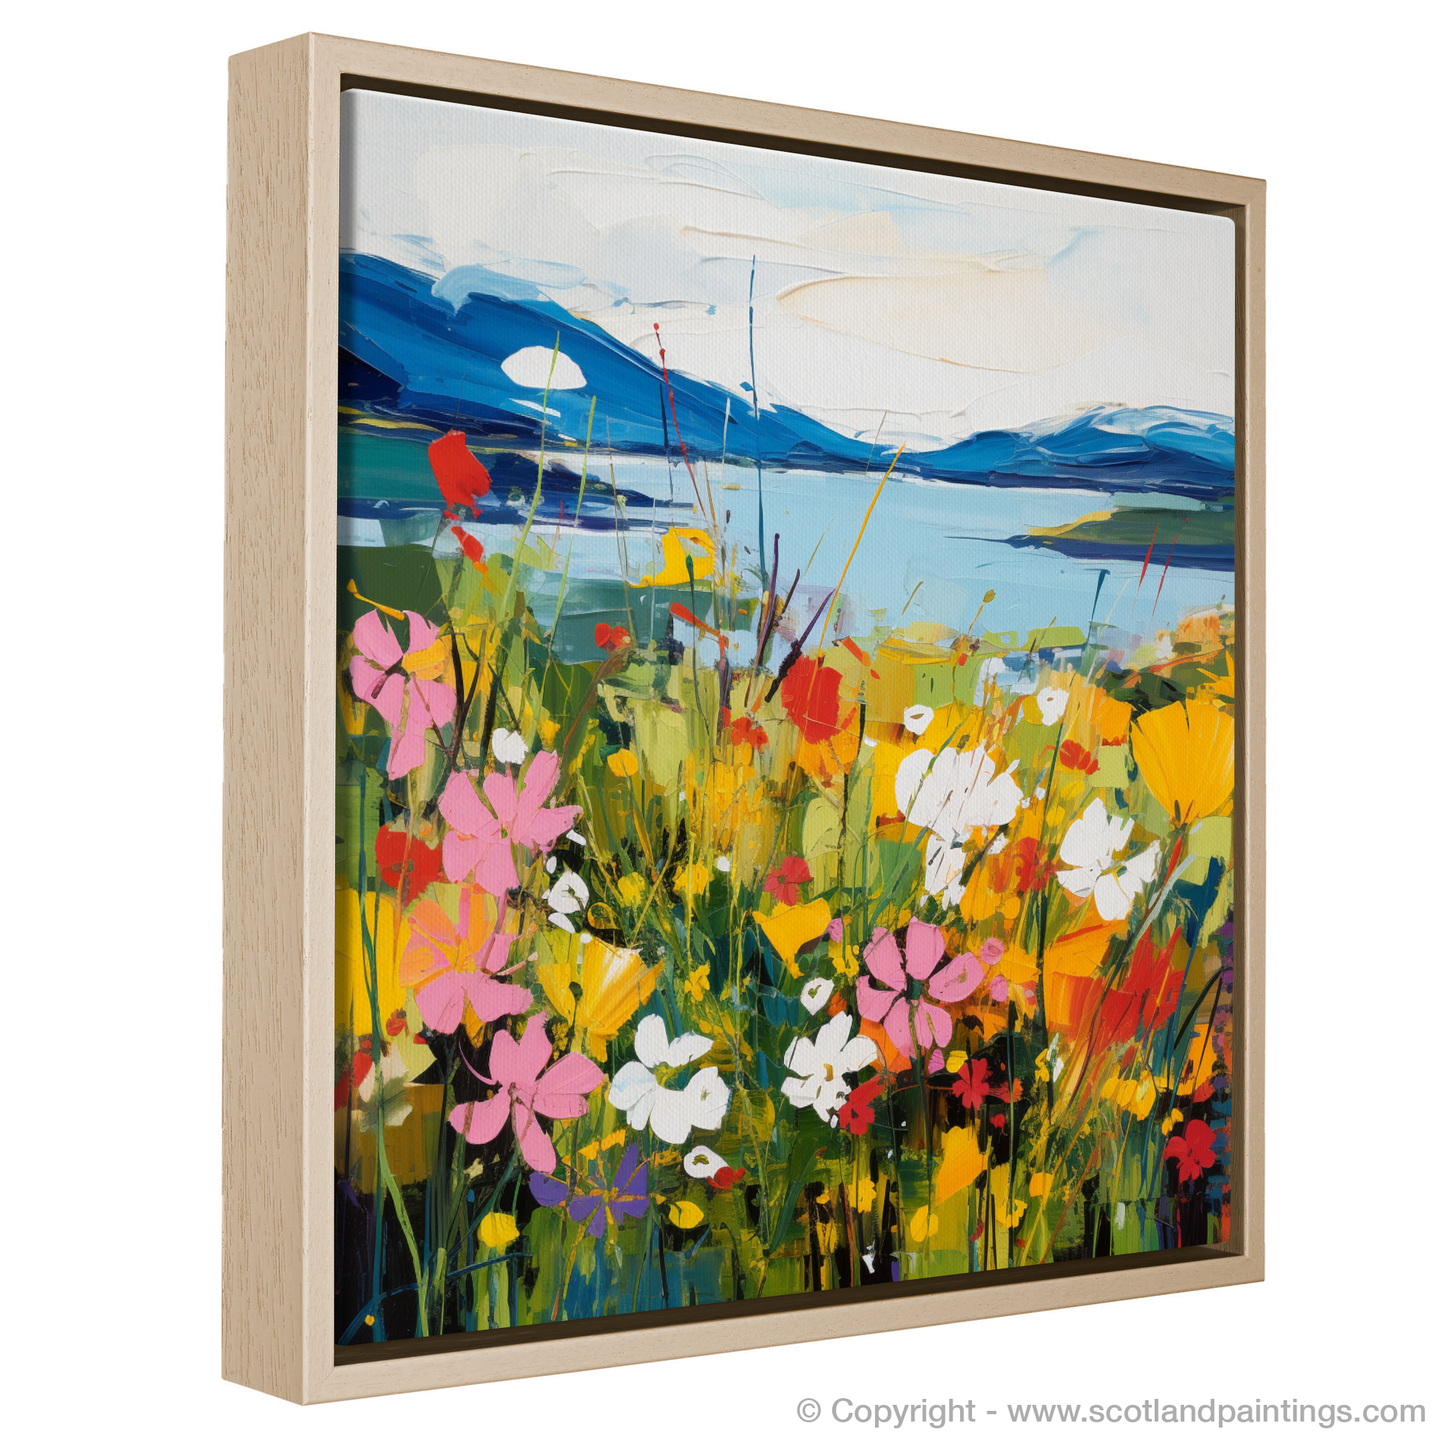 Painting and Art Print of Wildflowers by Loch Lomond entitled "Wildflowers in Bloom: An Abstract Ode to Loch Lomond".